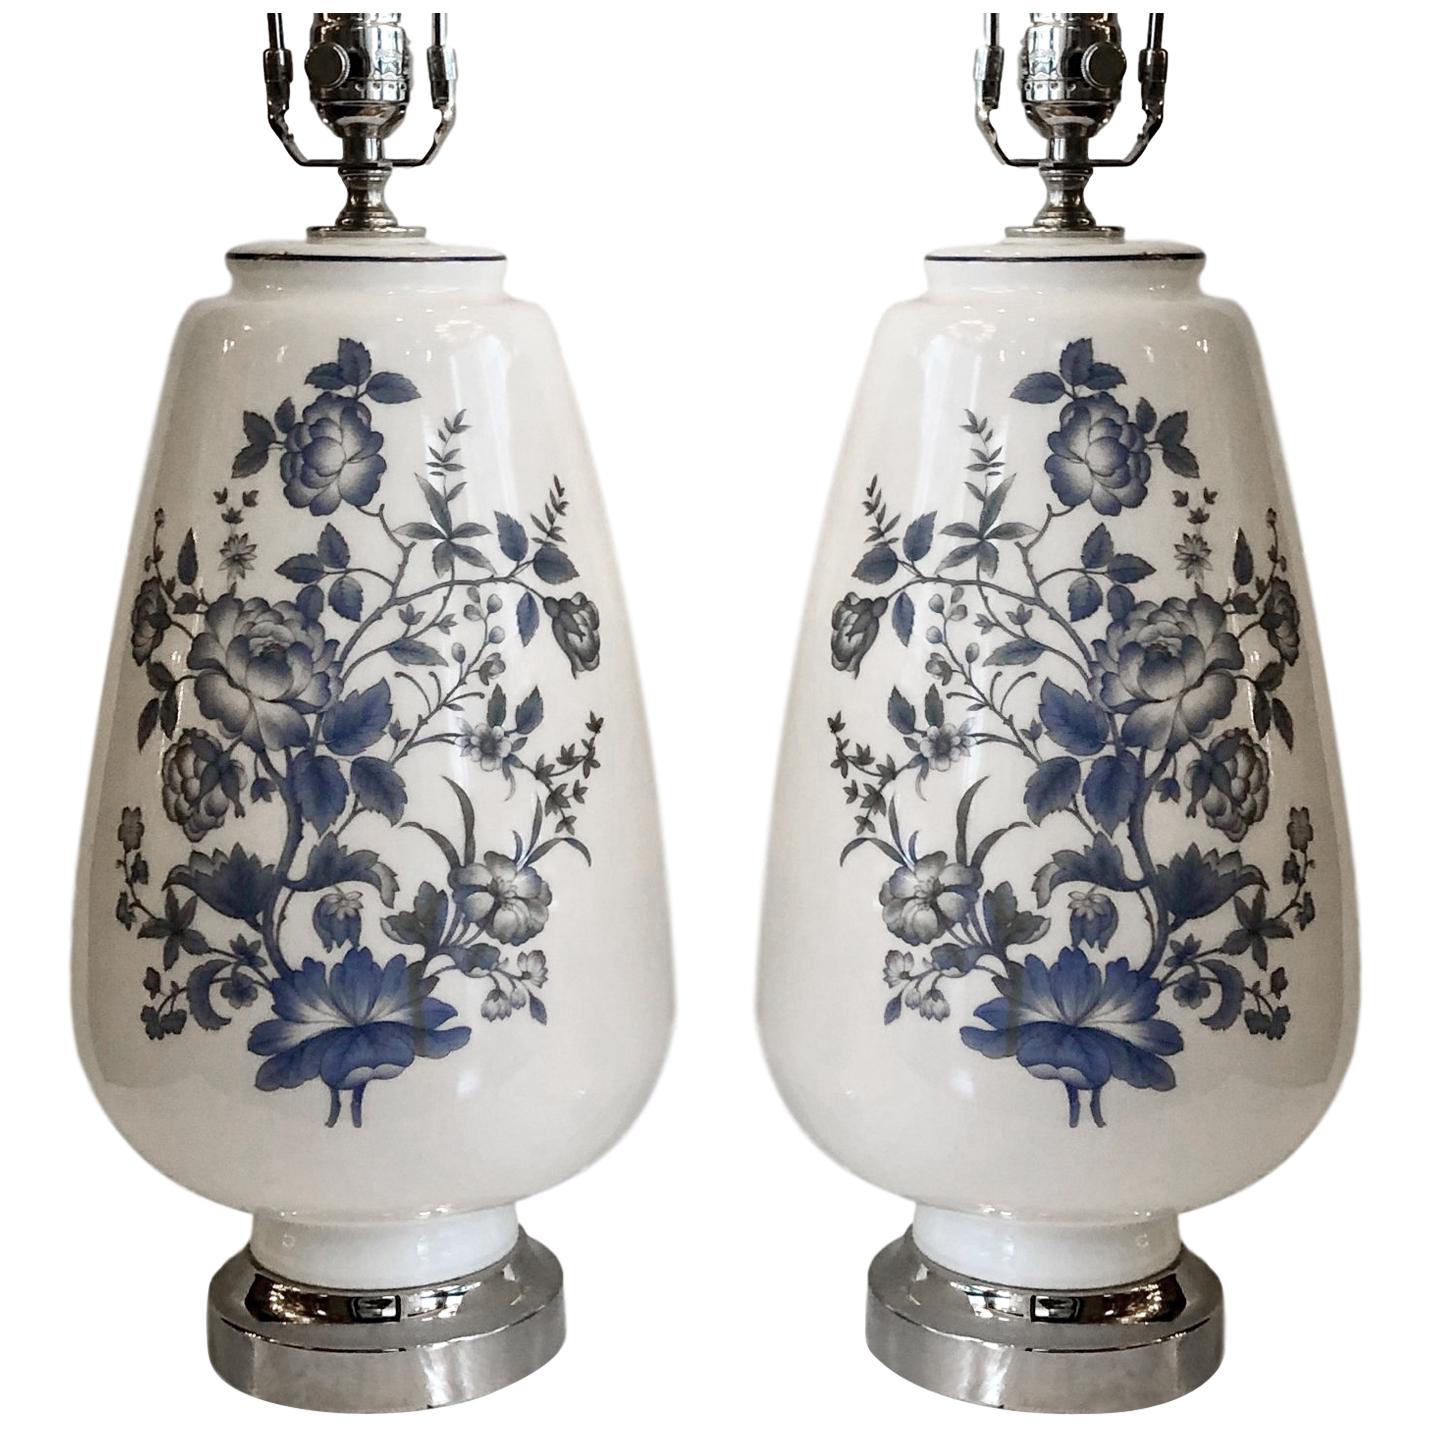 Pair of White and Blue Opaline Glass Lamps